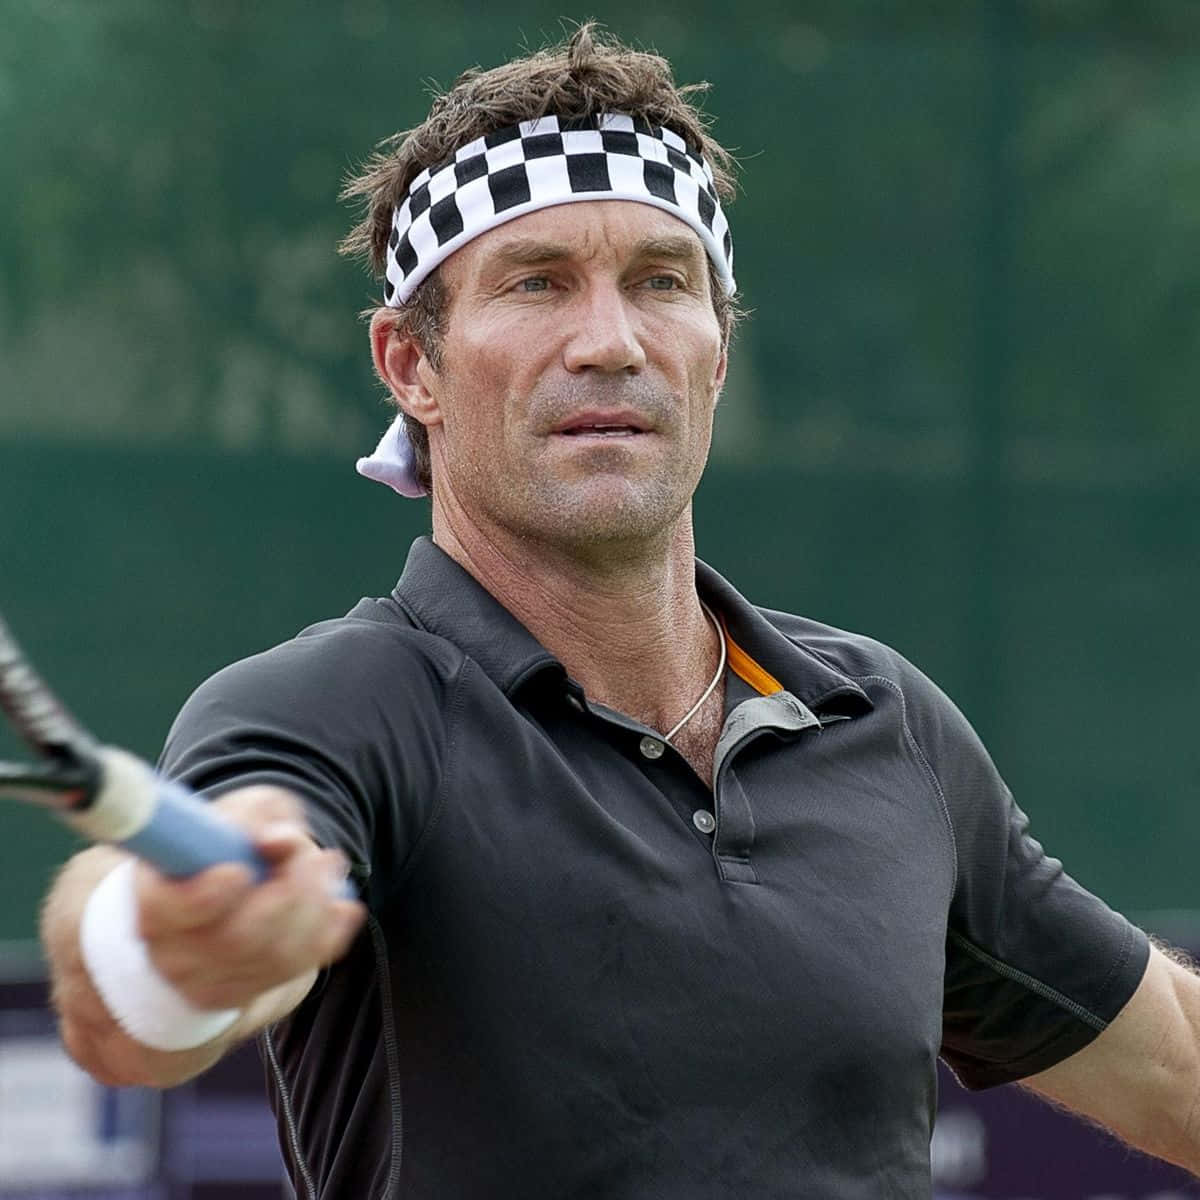 Pat Cash Stay Strong Wallpaper